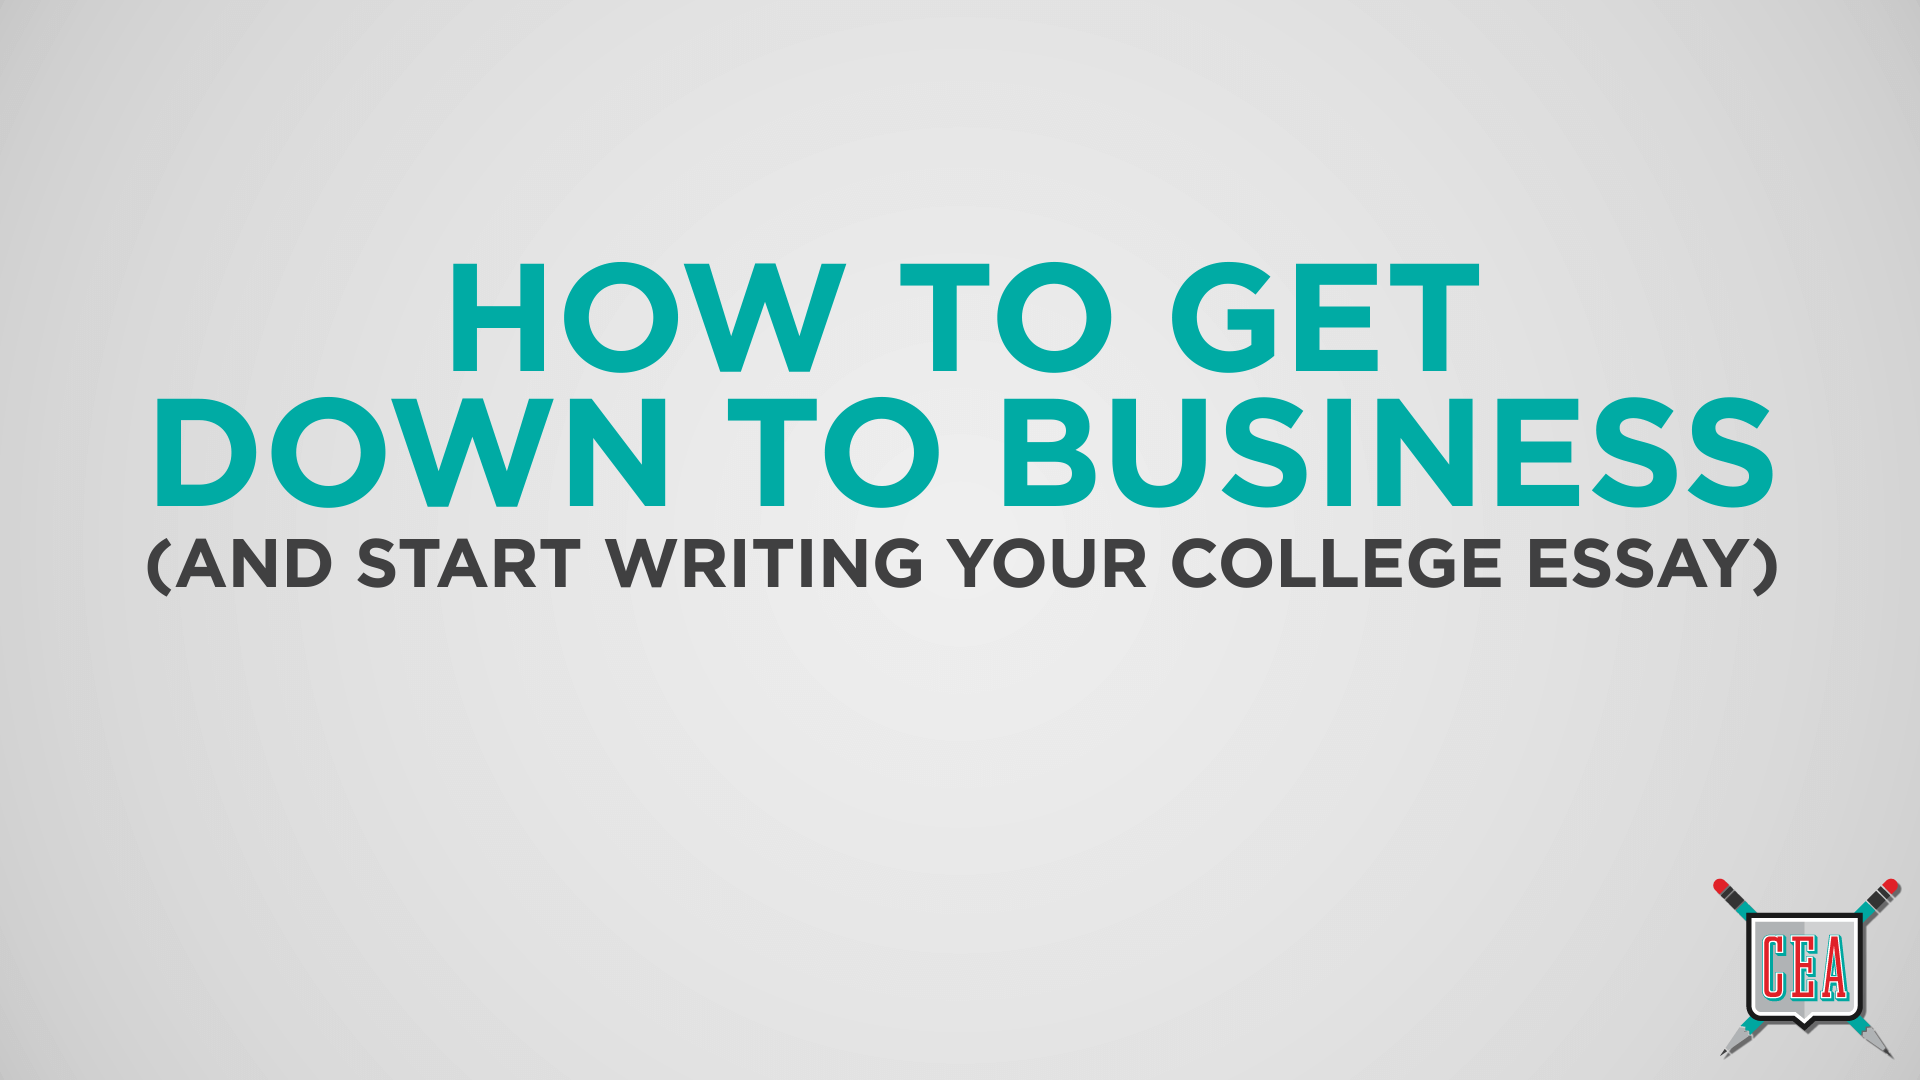 How to Begin the College Essay Writing Process